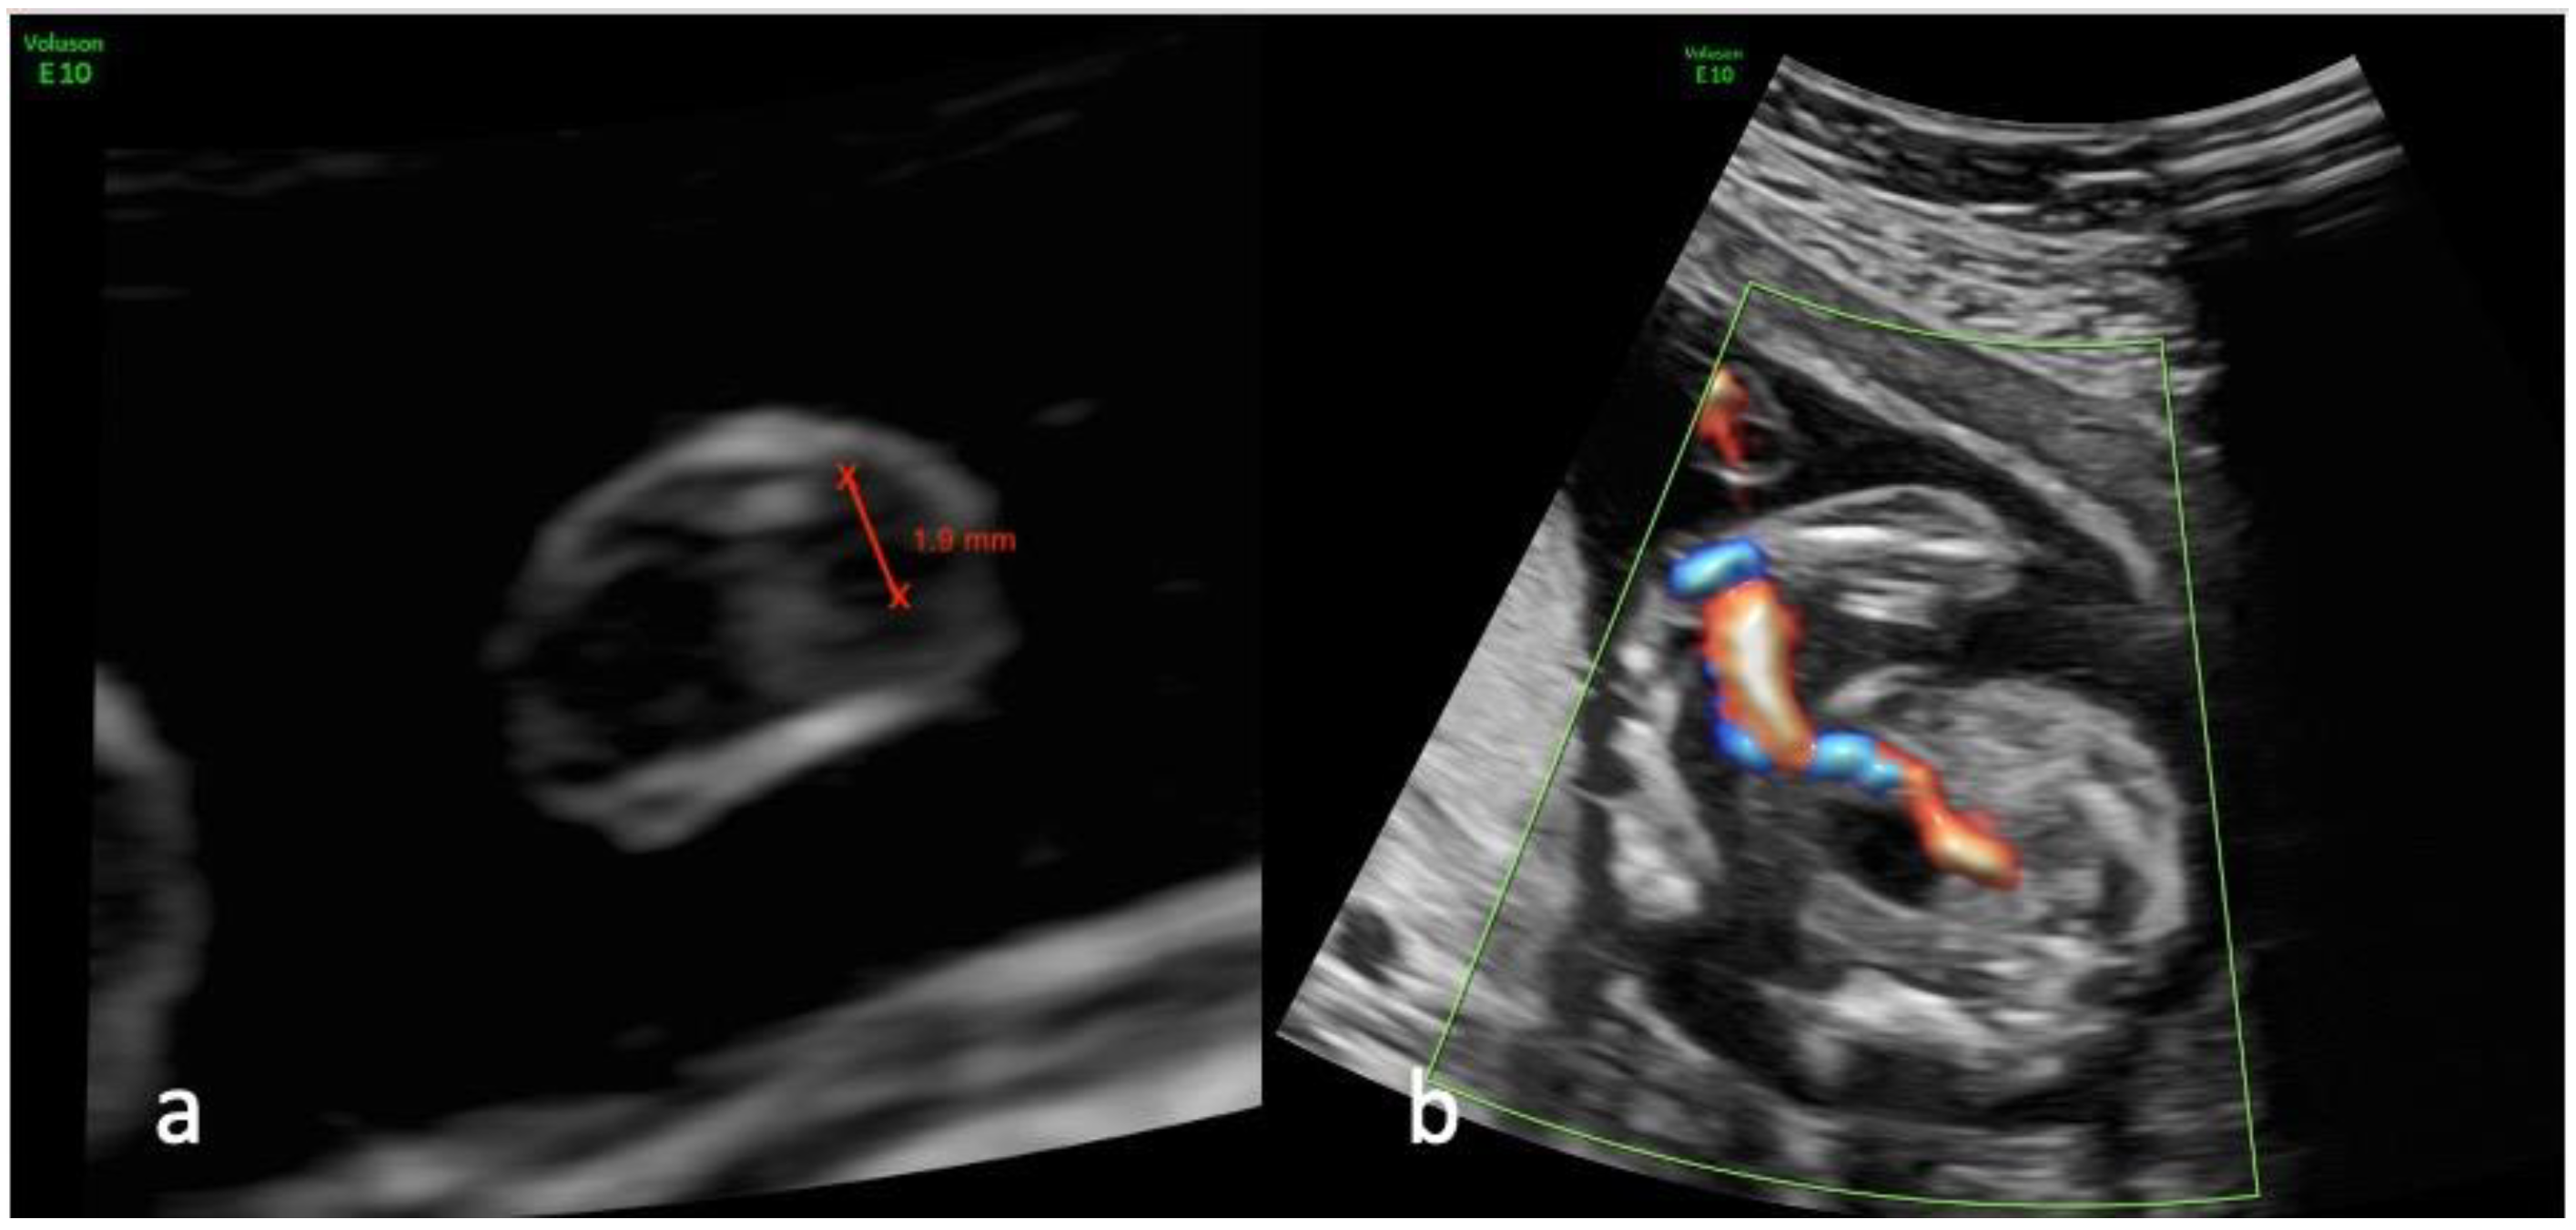 Diagnostics | Free Full-Text | Changes in Artery Diameters and Fetal Growth  in Cases of Isolated Single Umbilical Artery